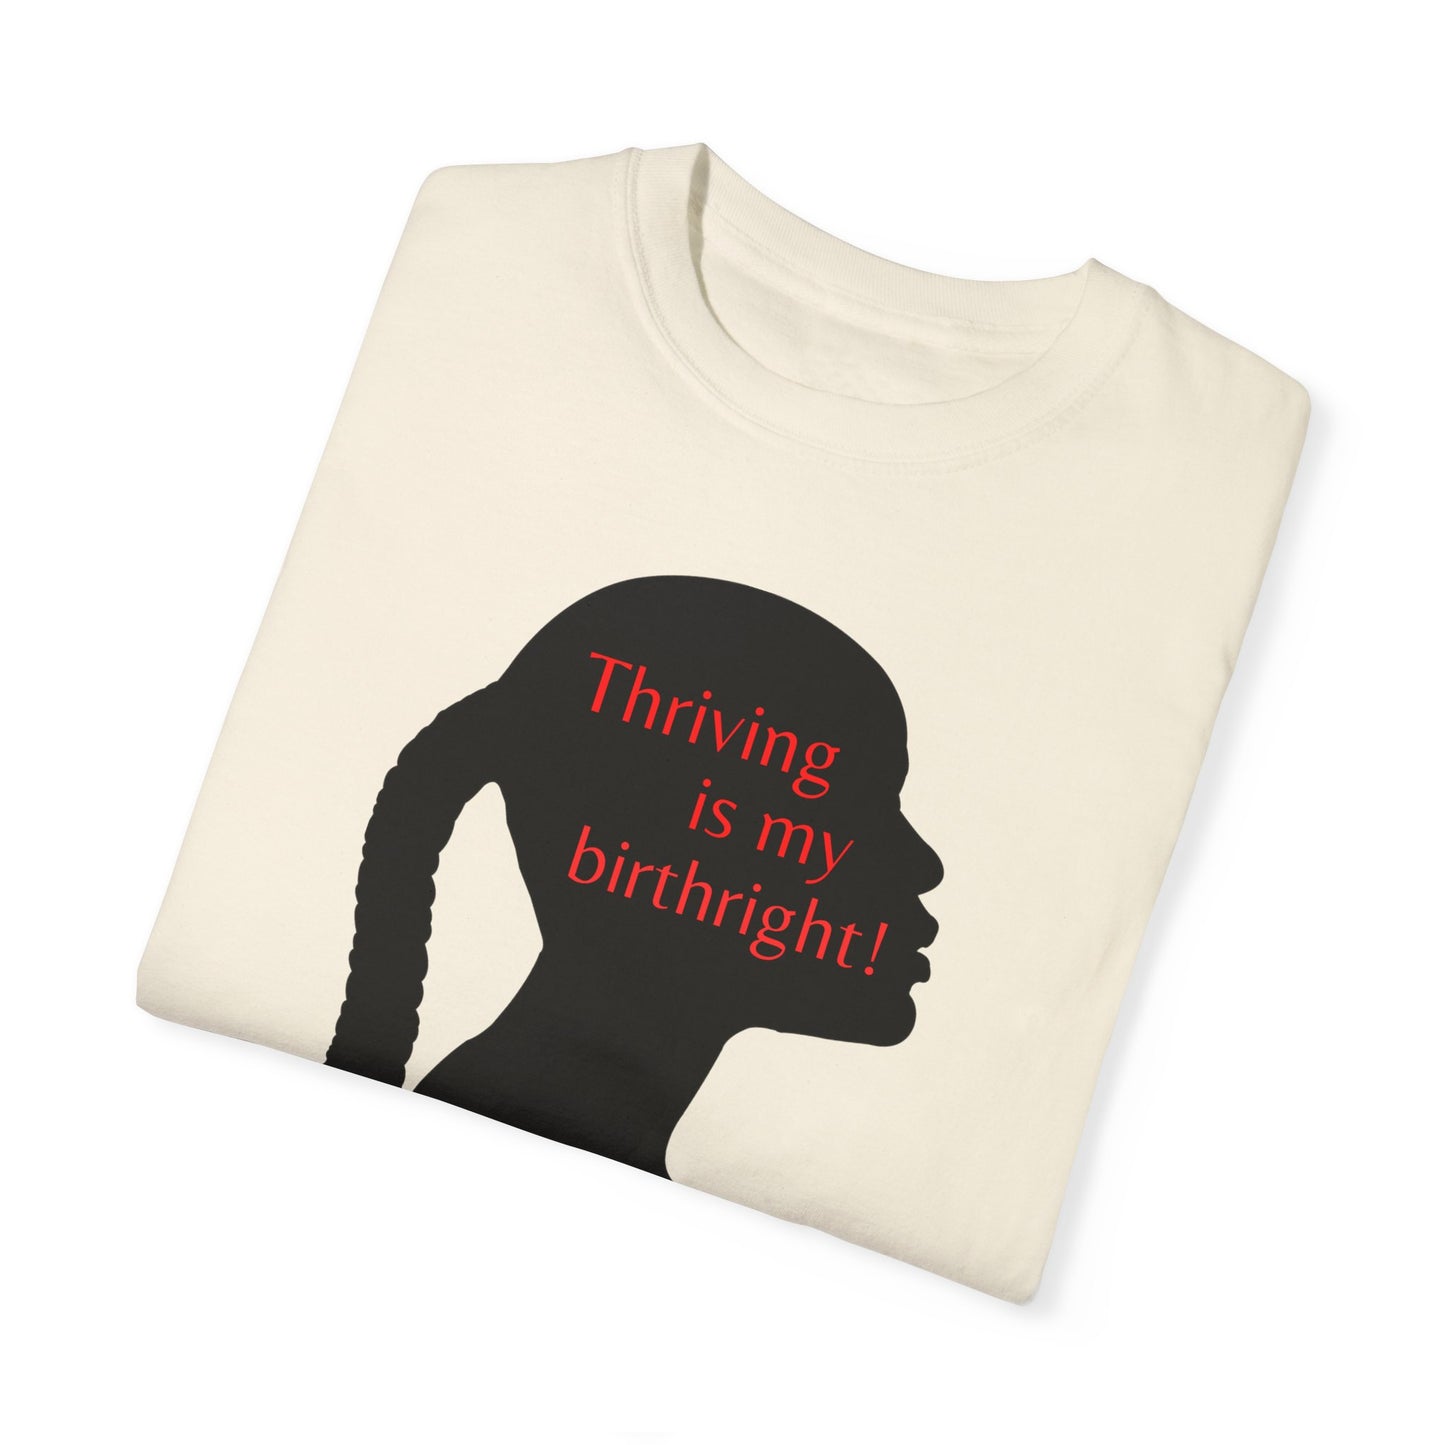 THRIVING IS MY BIRTHRIGHT - Female - Garment-Dyed T-shirt